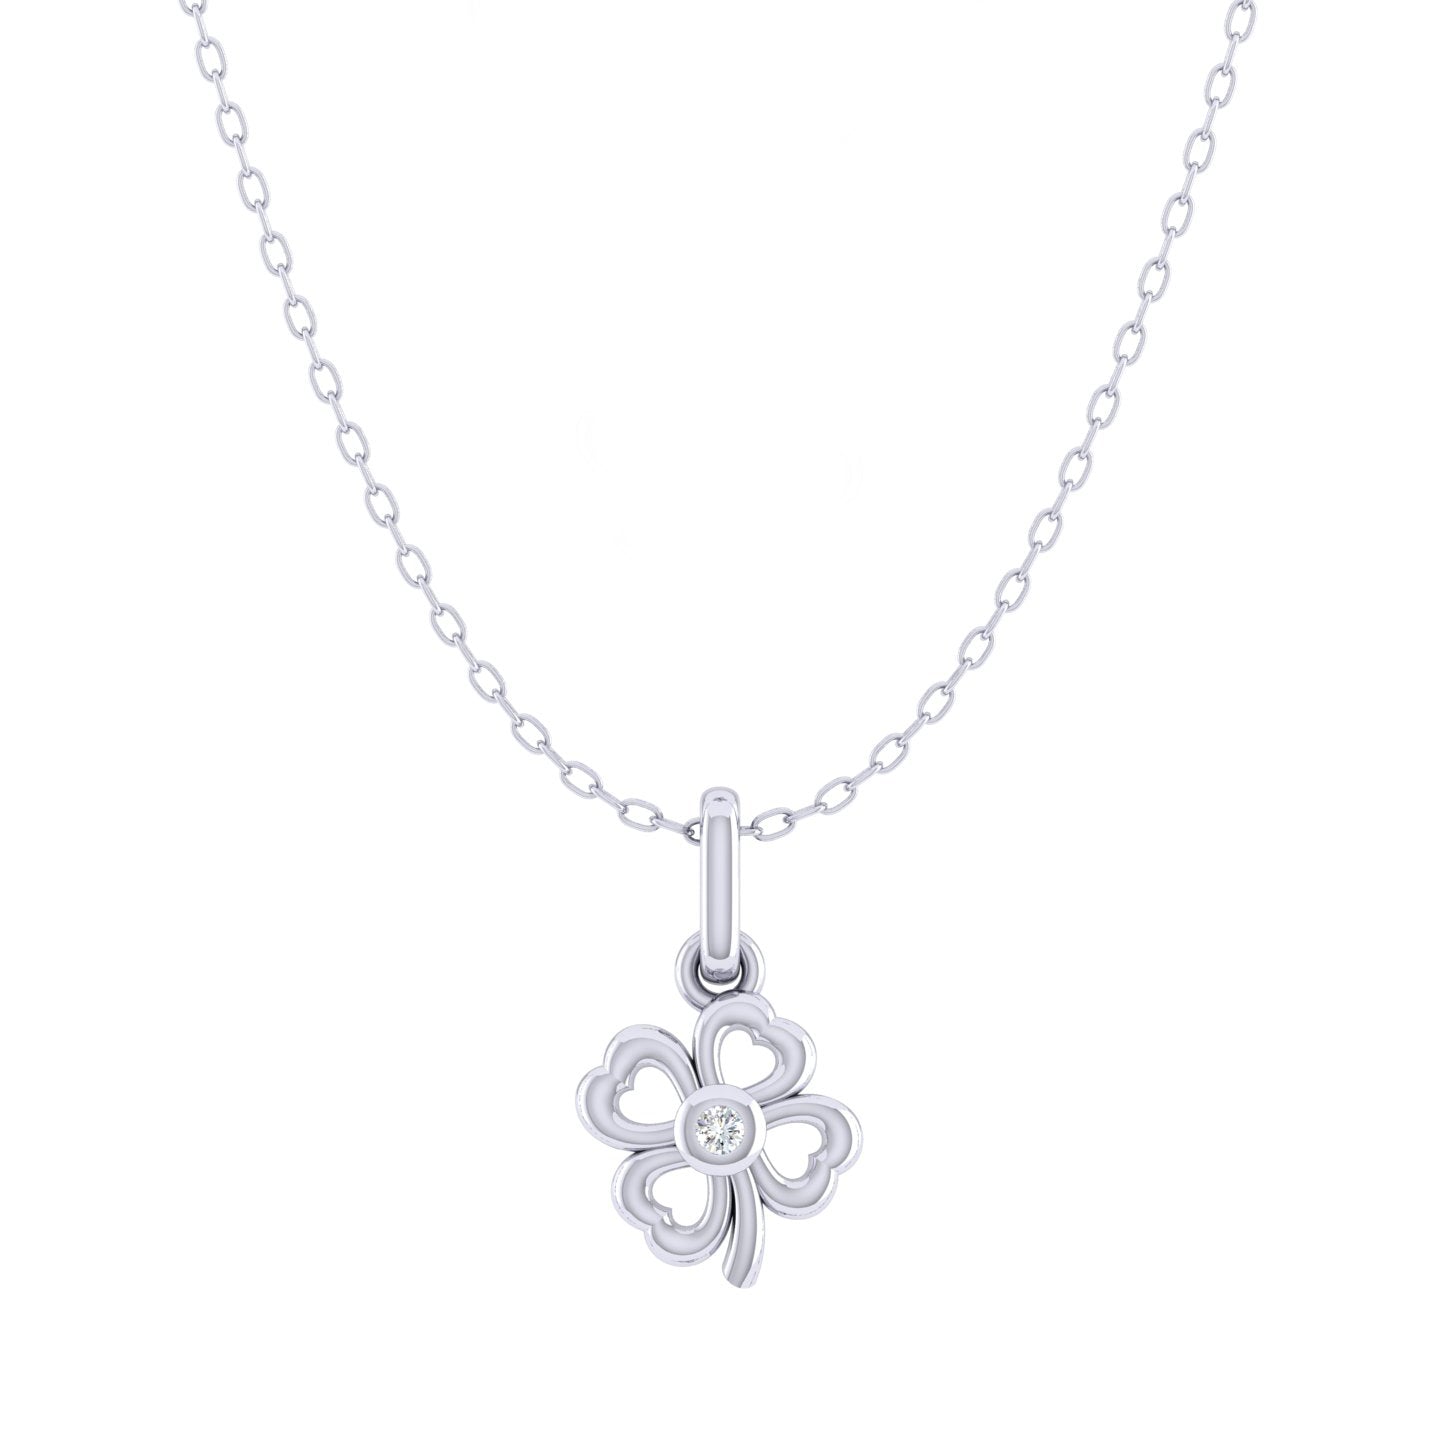 Four Leaf Clover 1/40 Cttw Natural Diamond Pendant Necklace set in 925 Sterling Silver